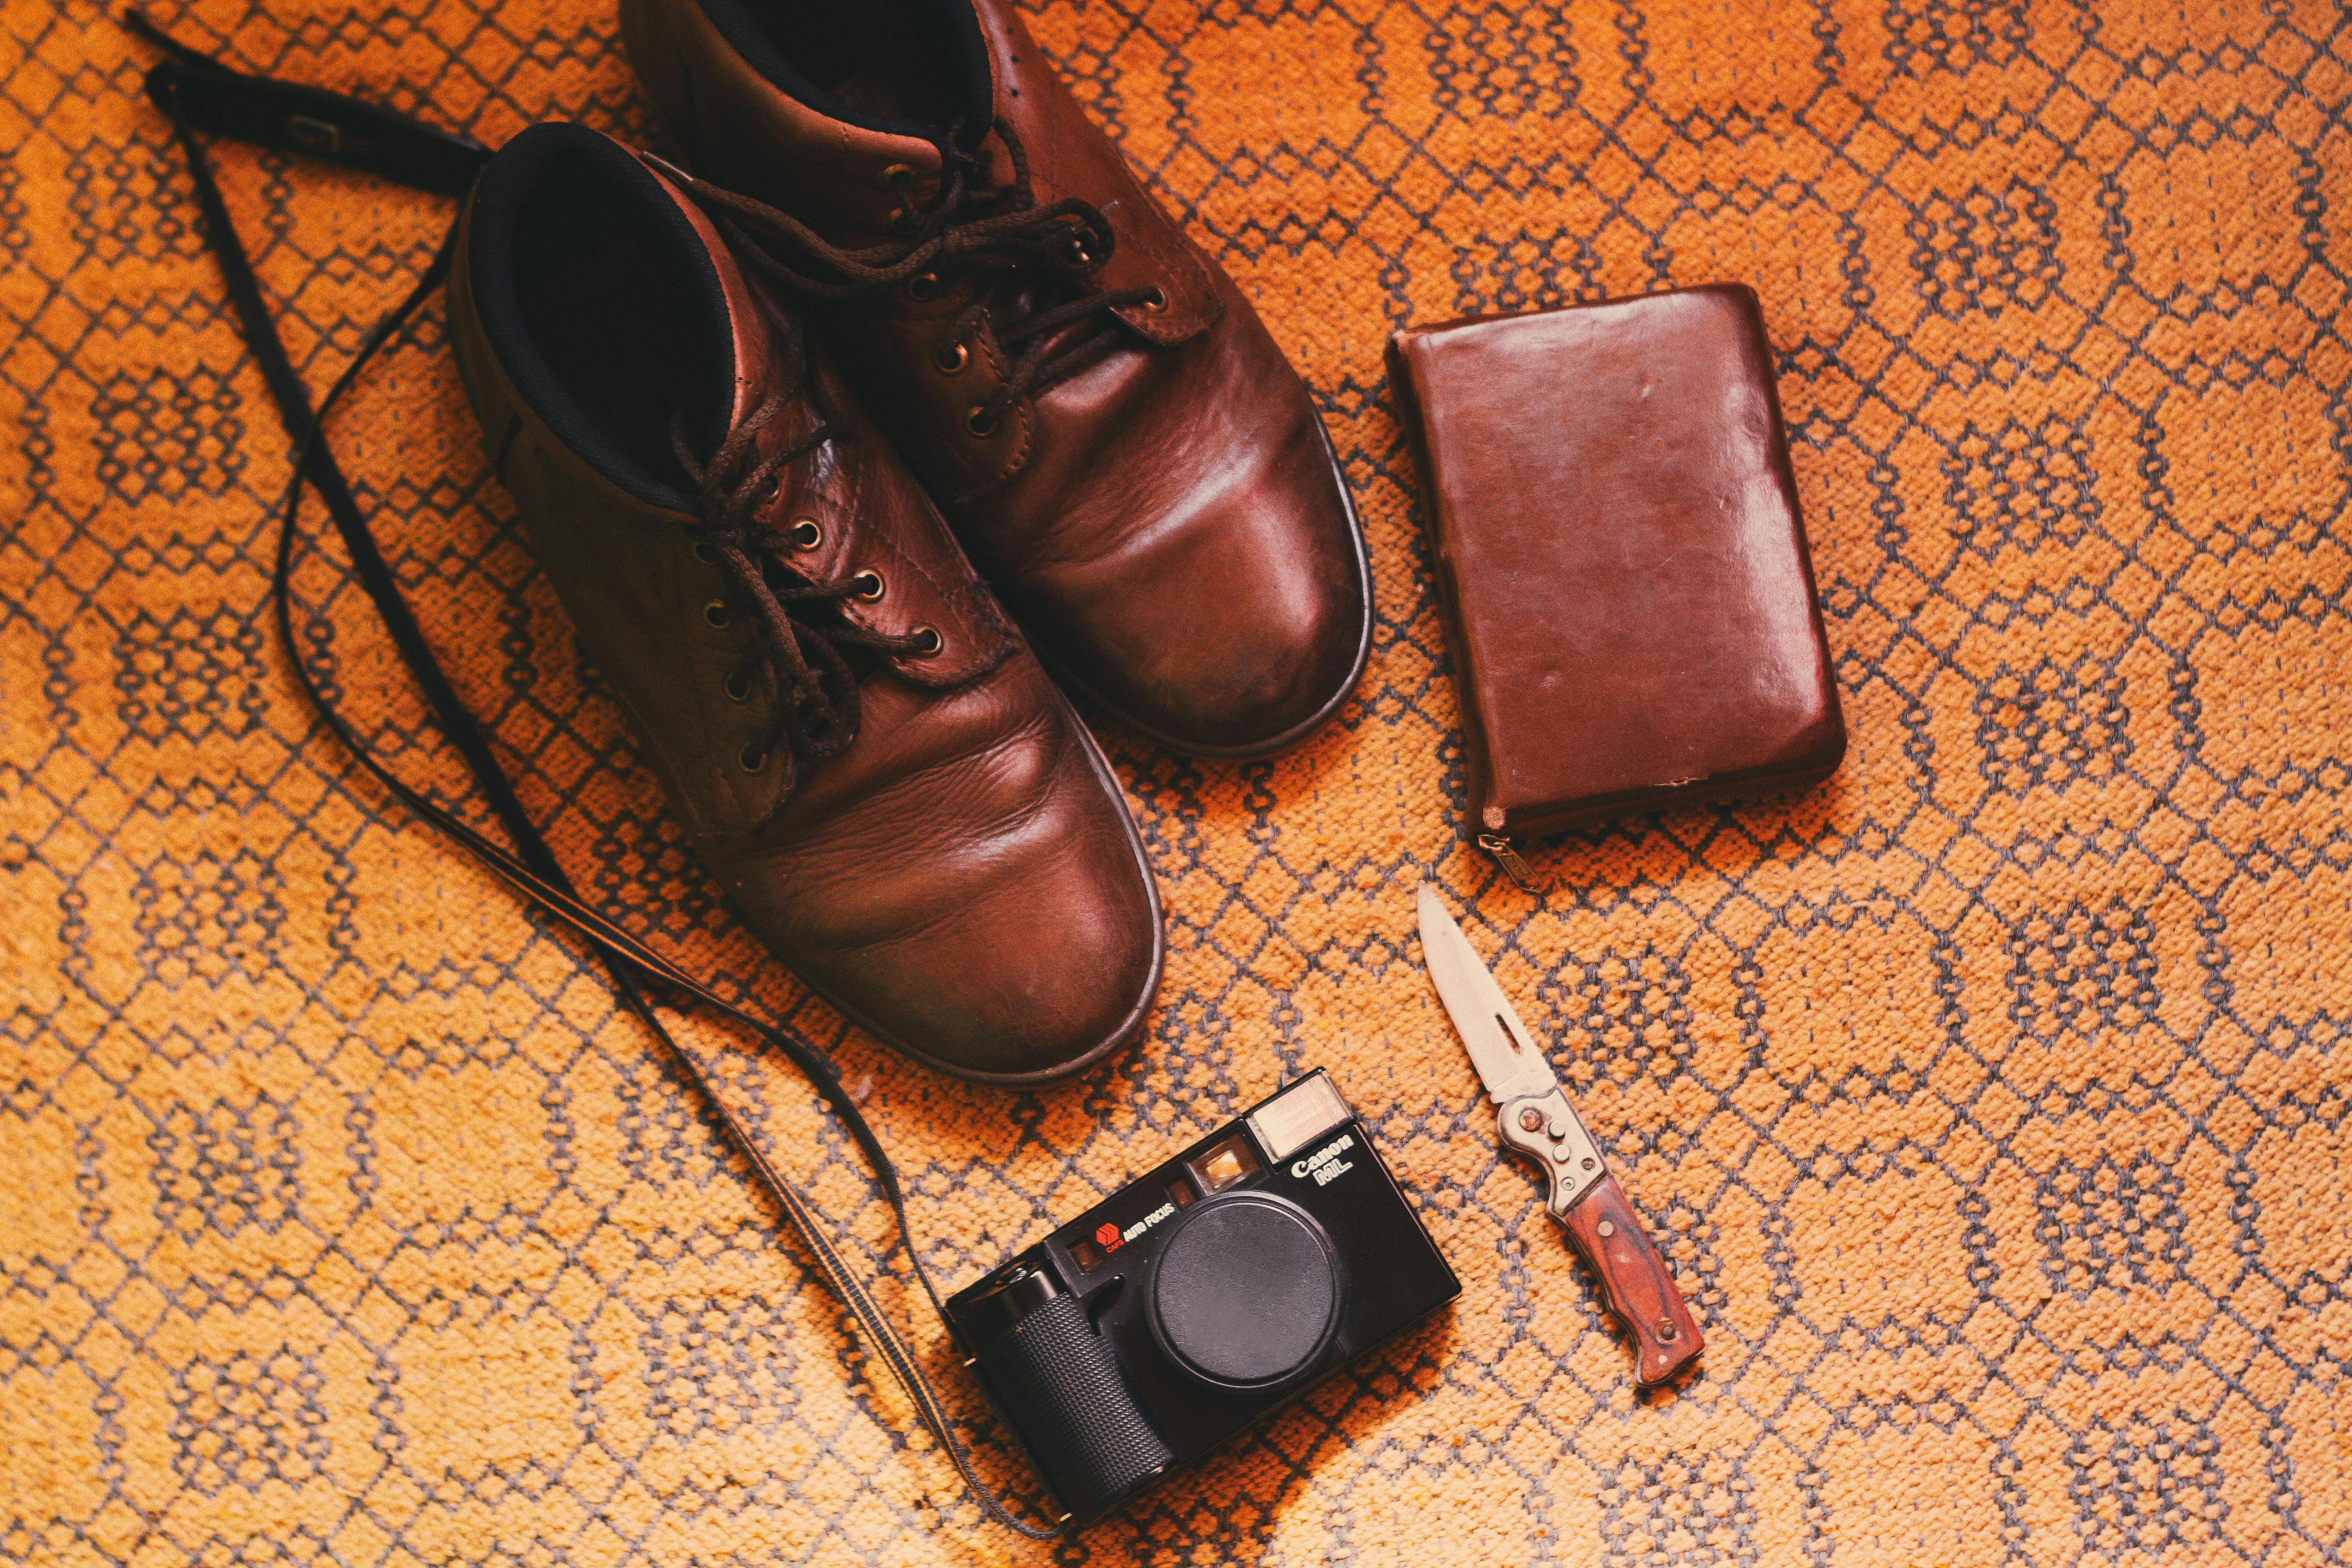 A pair of brown leather shoes | Source: Pexels